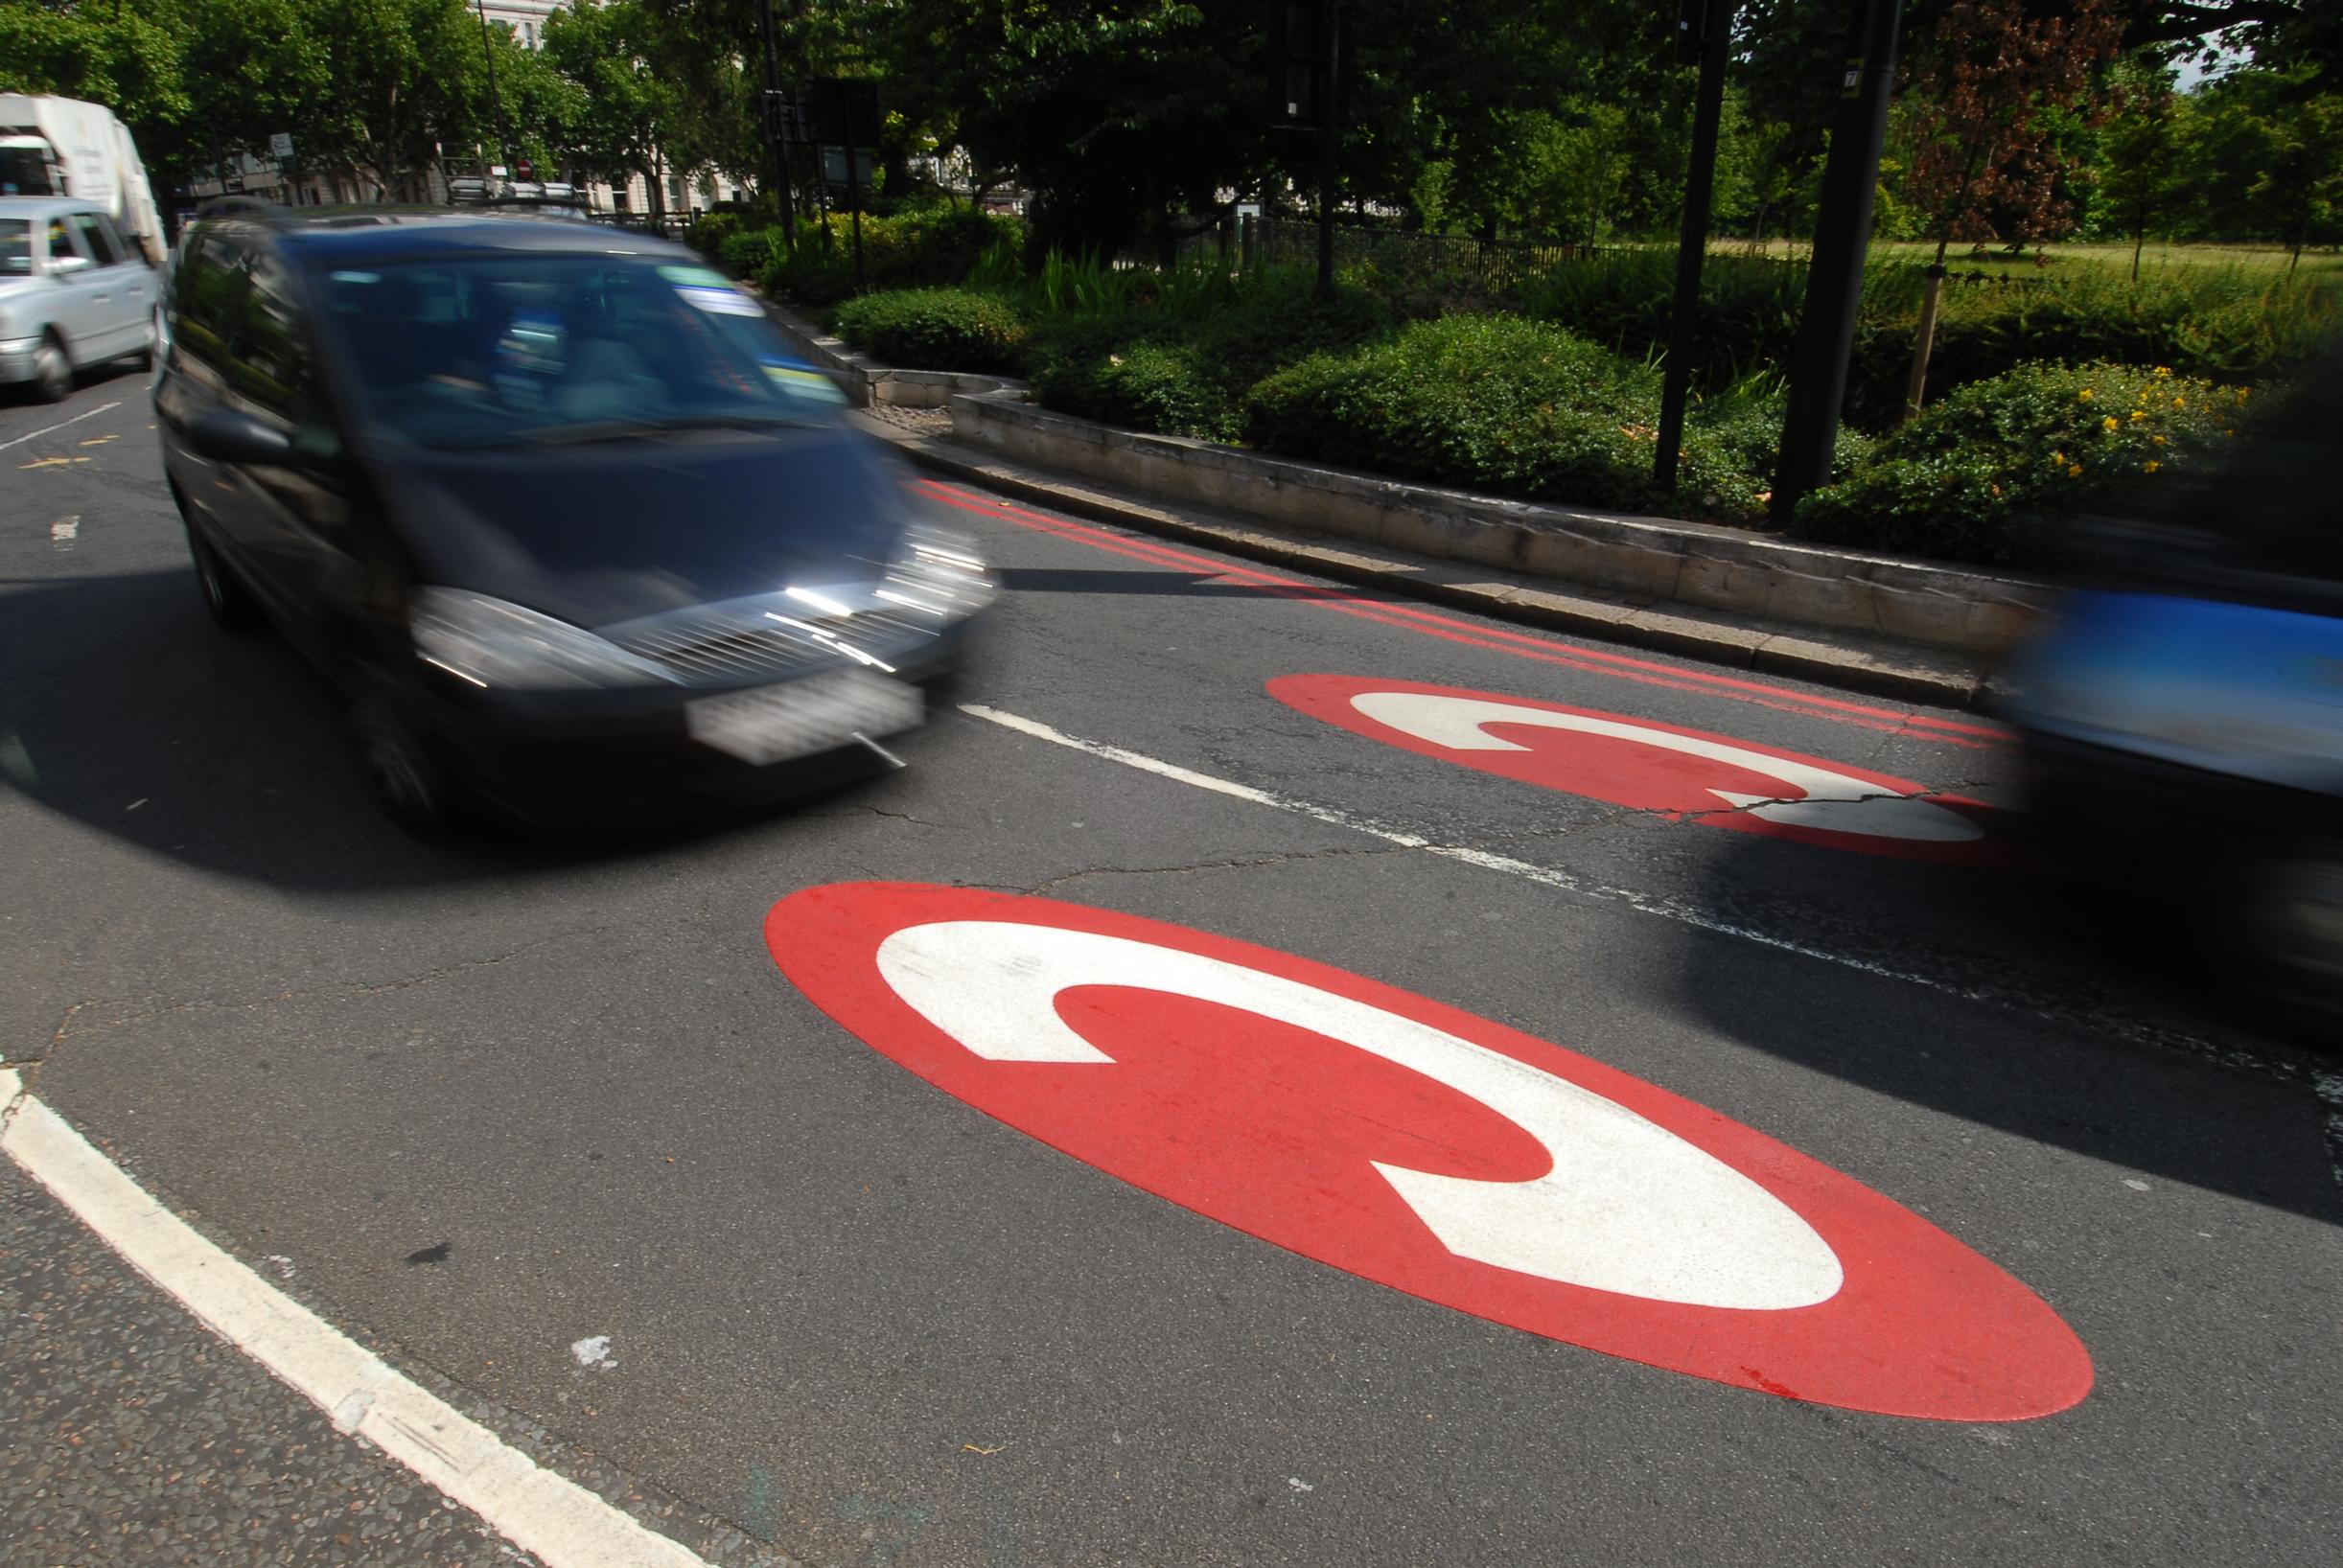 One current option is to Introduce a Greater London boundary charge, which would charge a small fee to non-London registered vehicles entering Greater London, responding to the increase in cars from outside London travelling into the city seen in recent years